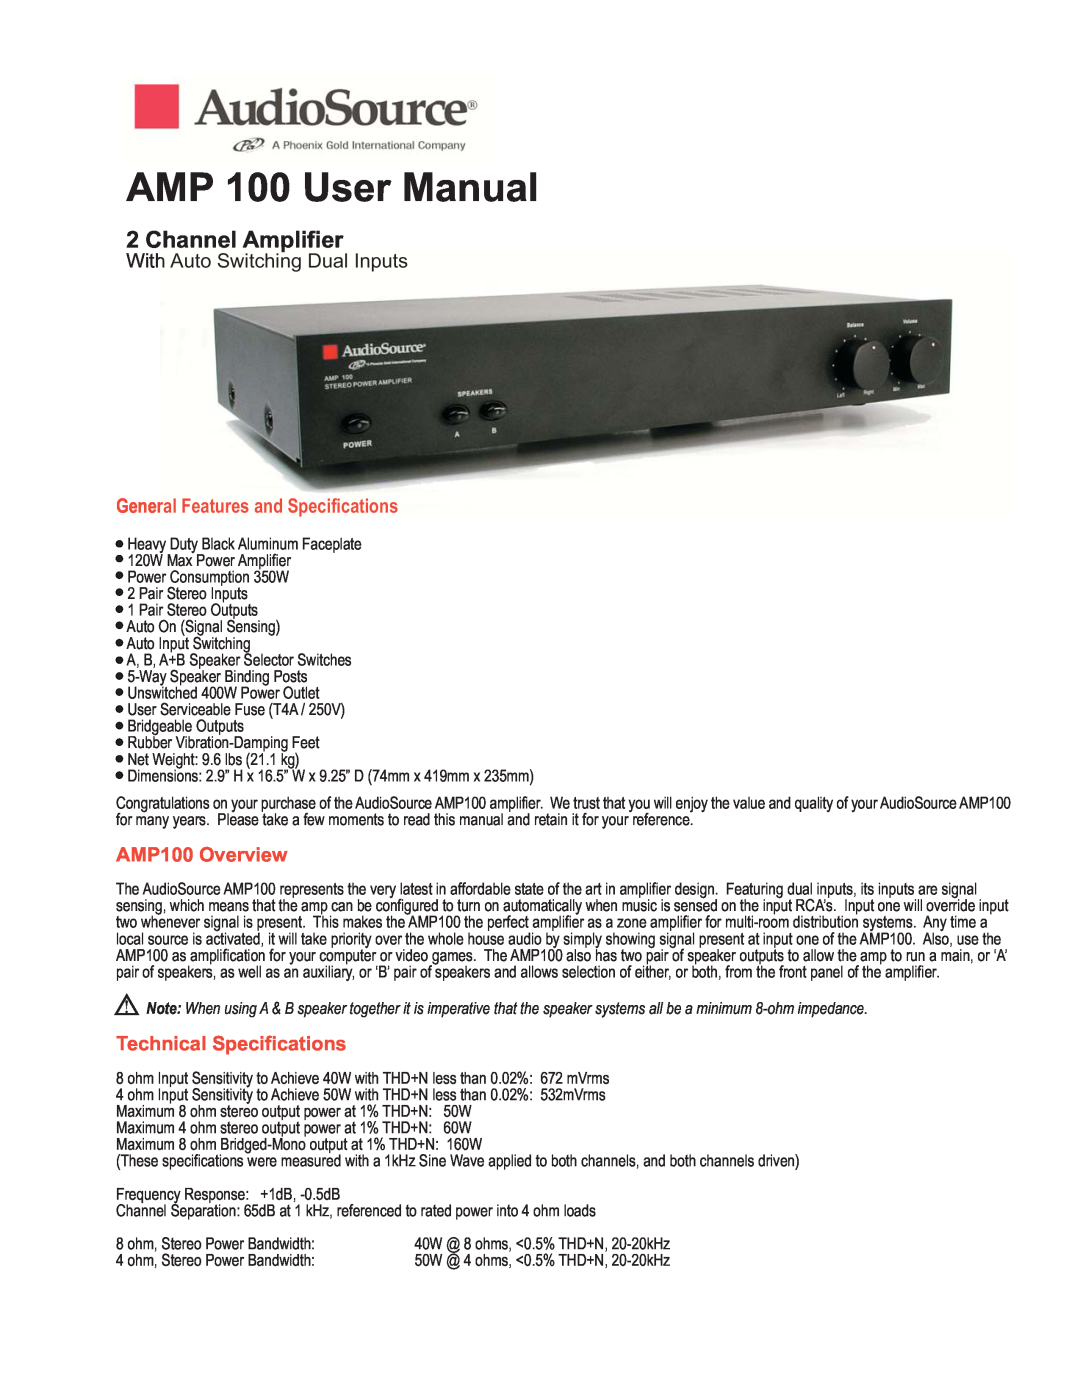 AudioSource 2 Channel Amplifier With Auto Switching Dual Inputs, AMP 100 technical specifications AMP100 Overview 